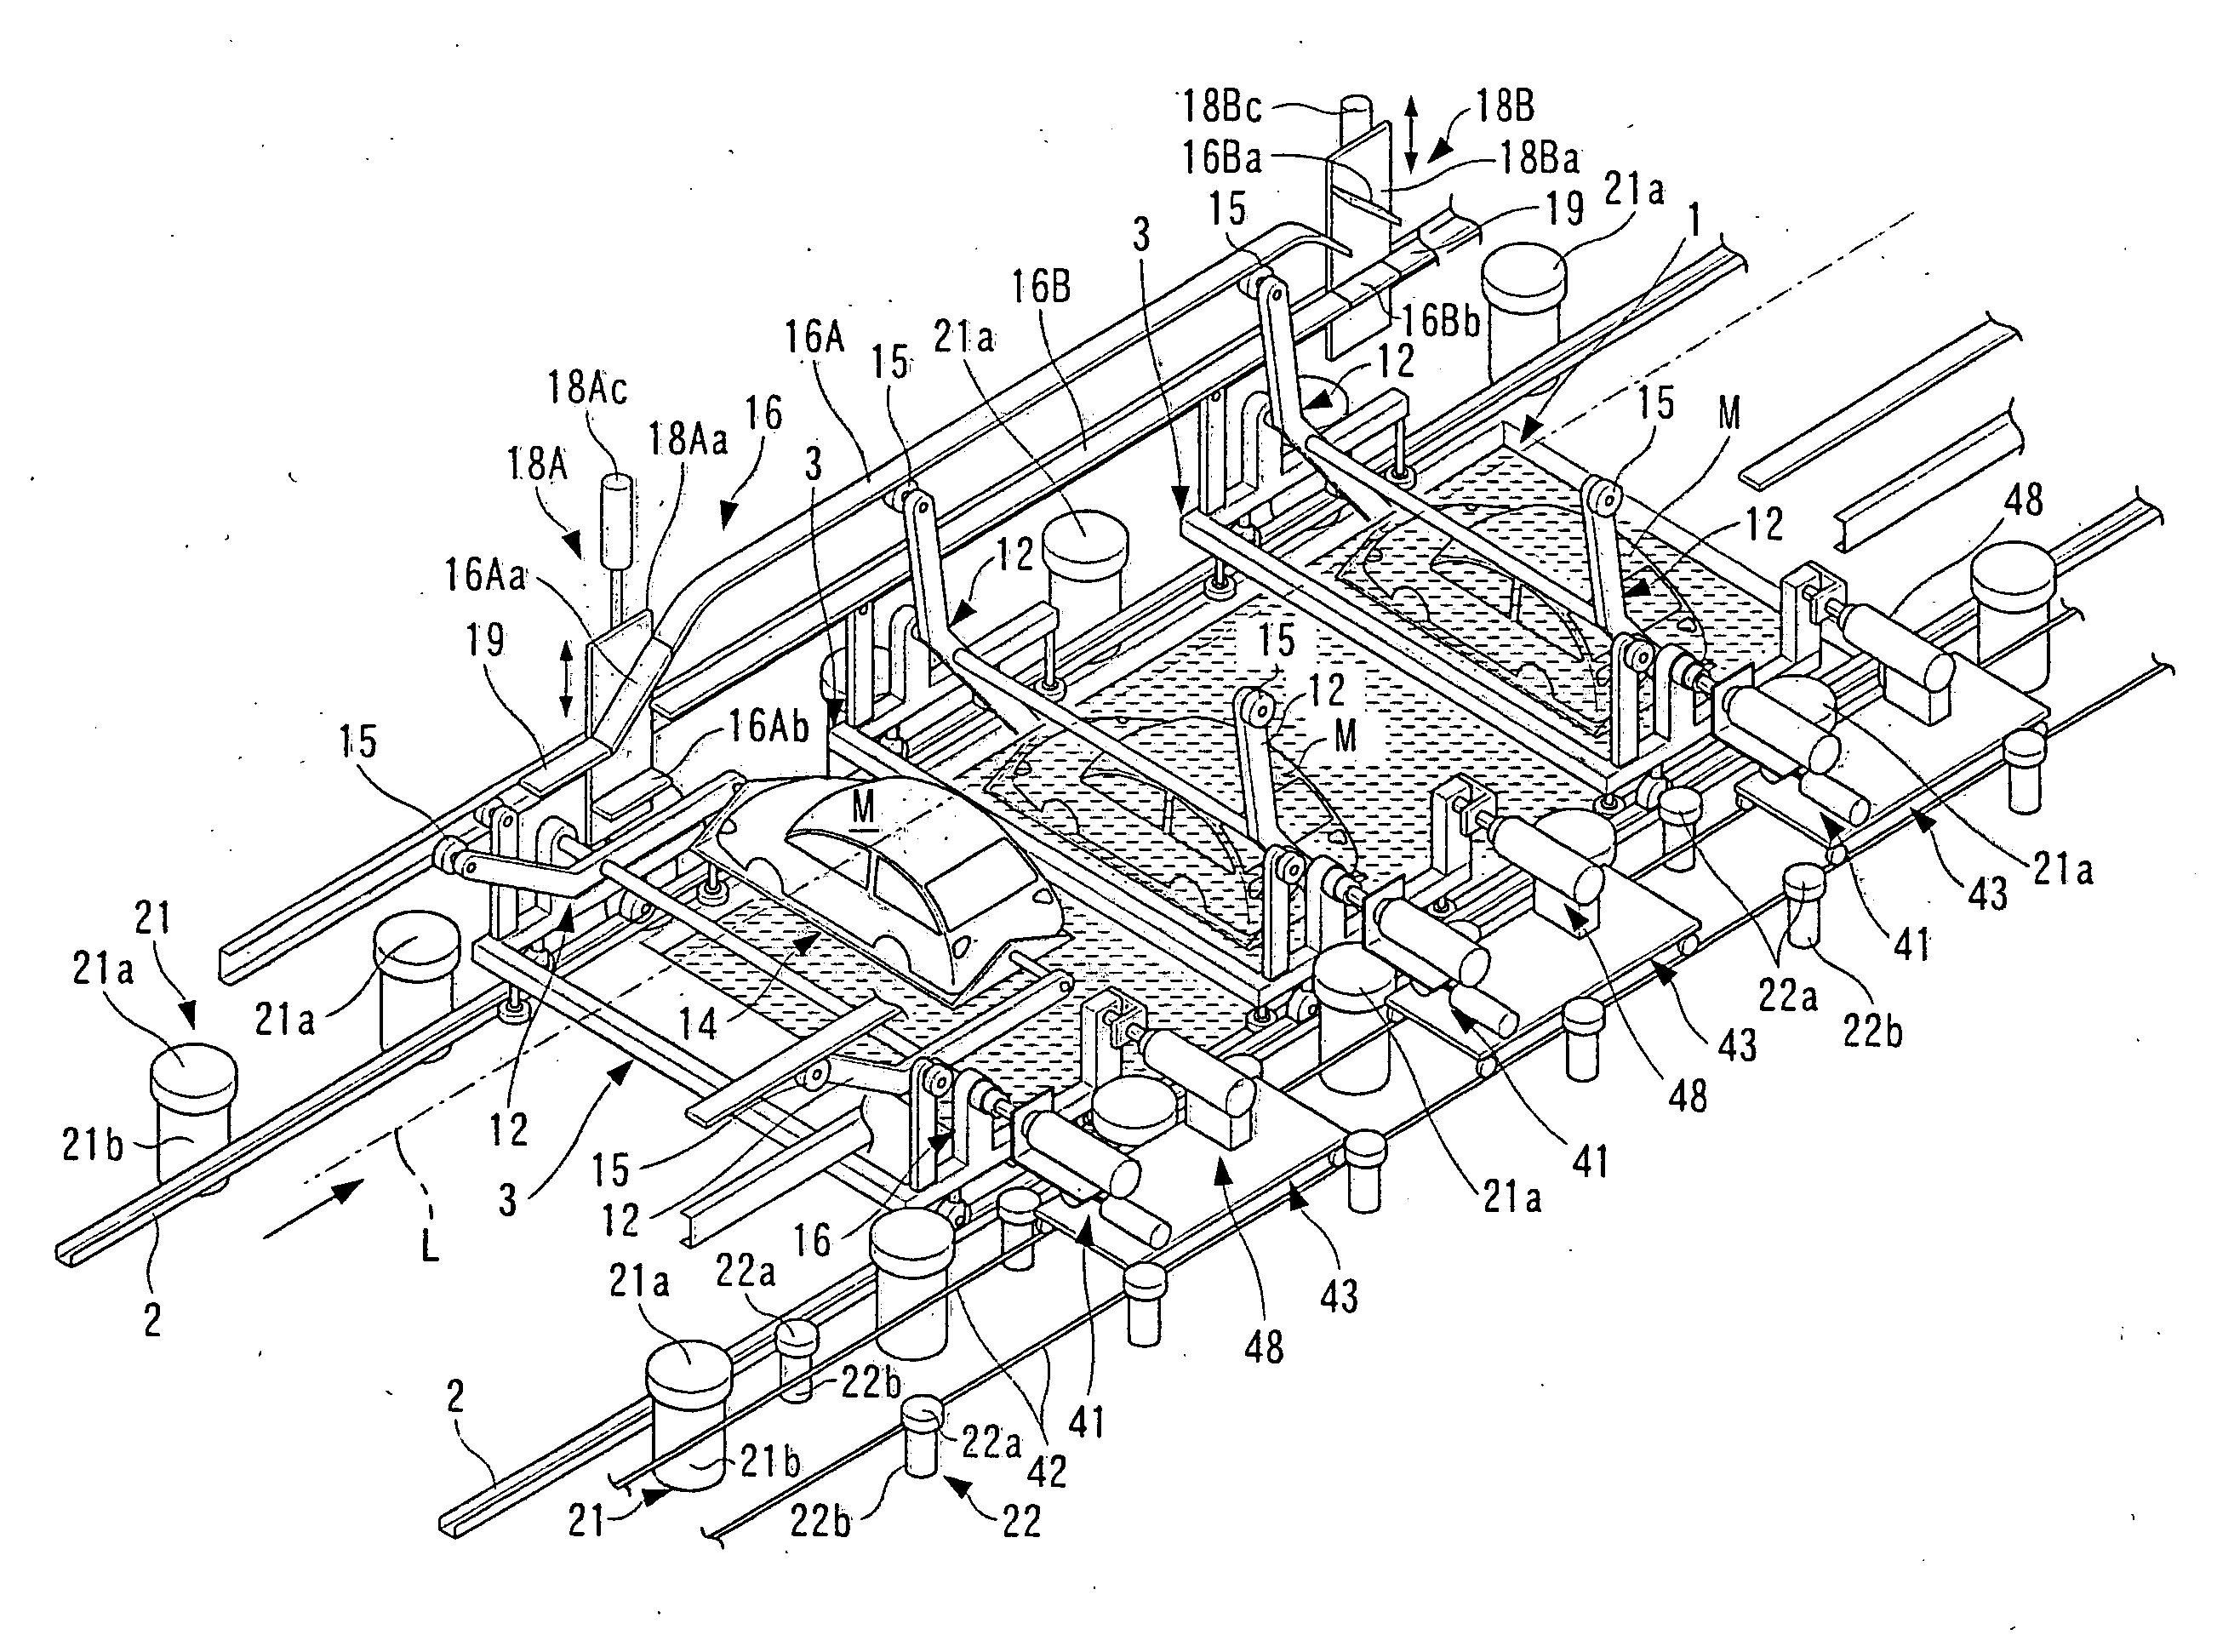 Conveyance method and apparatus for processing step